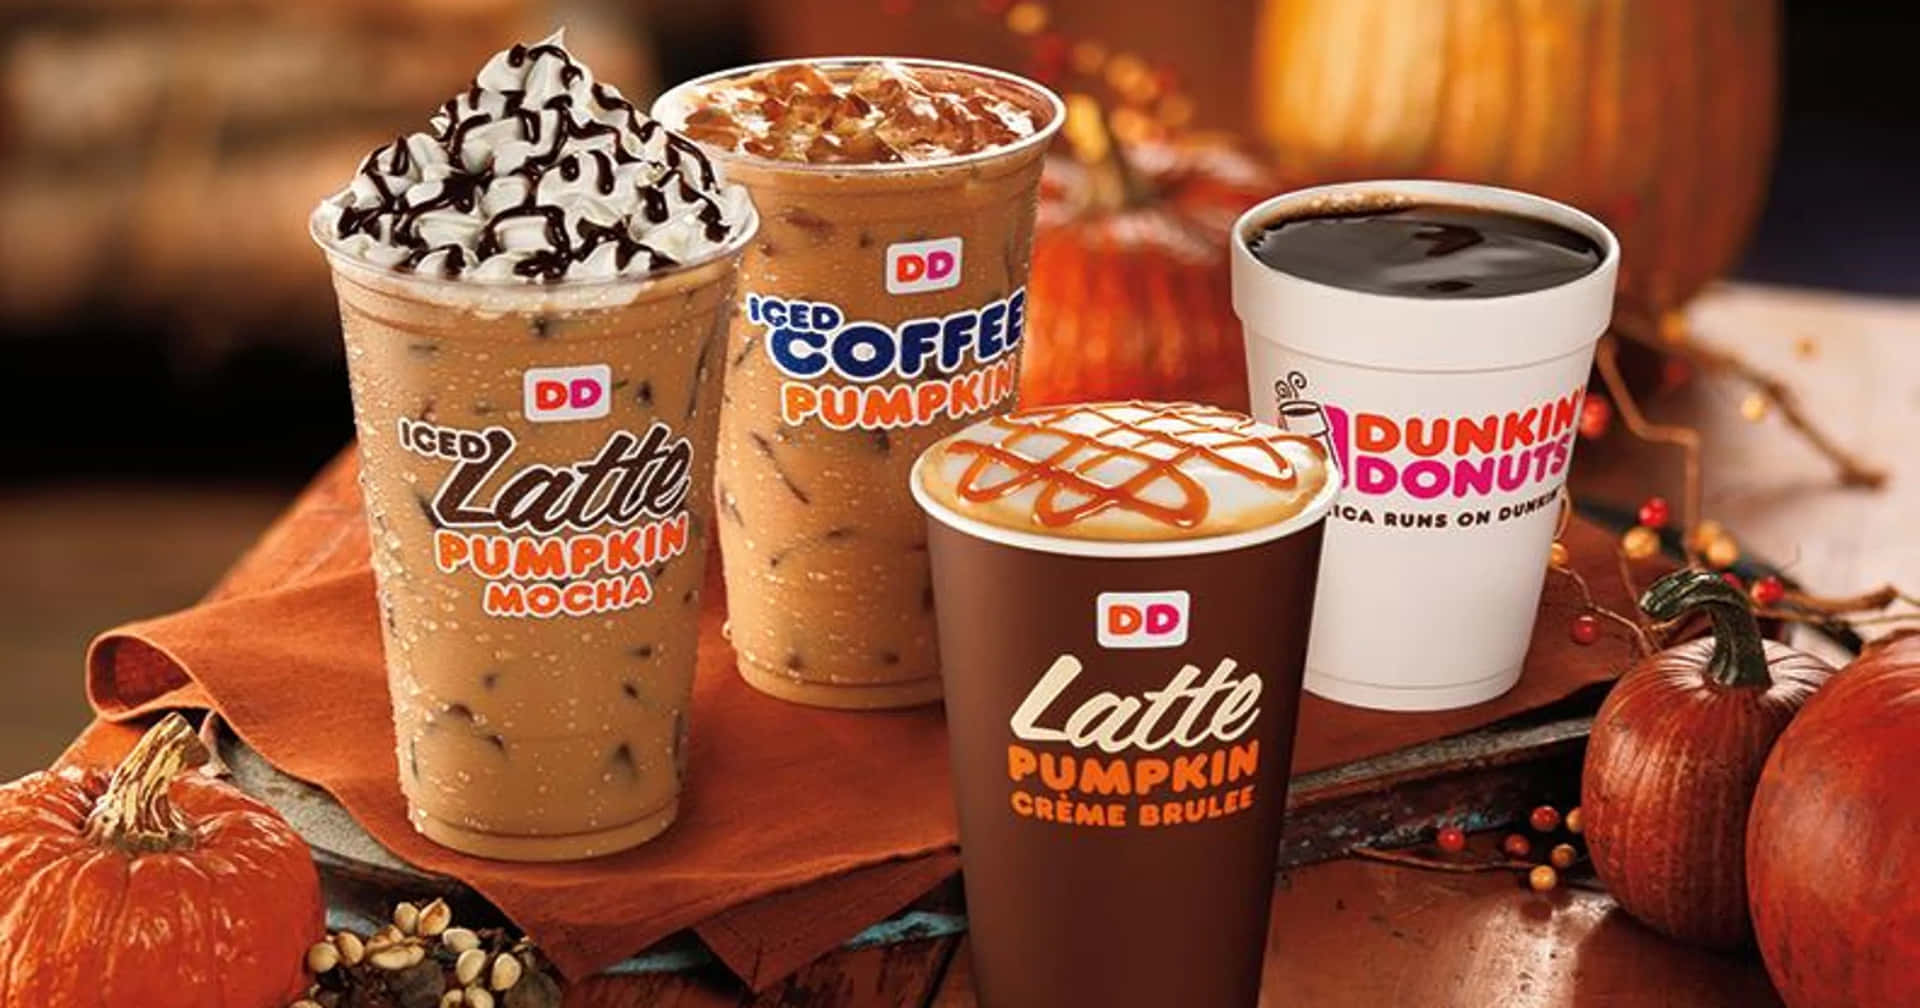 Start your day off right with Dunkin Donuts